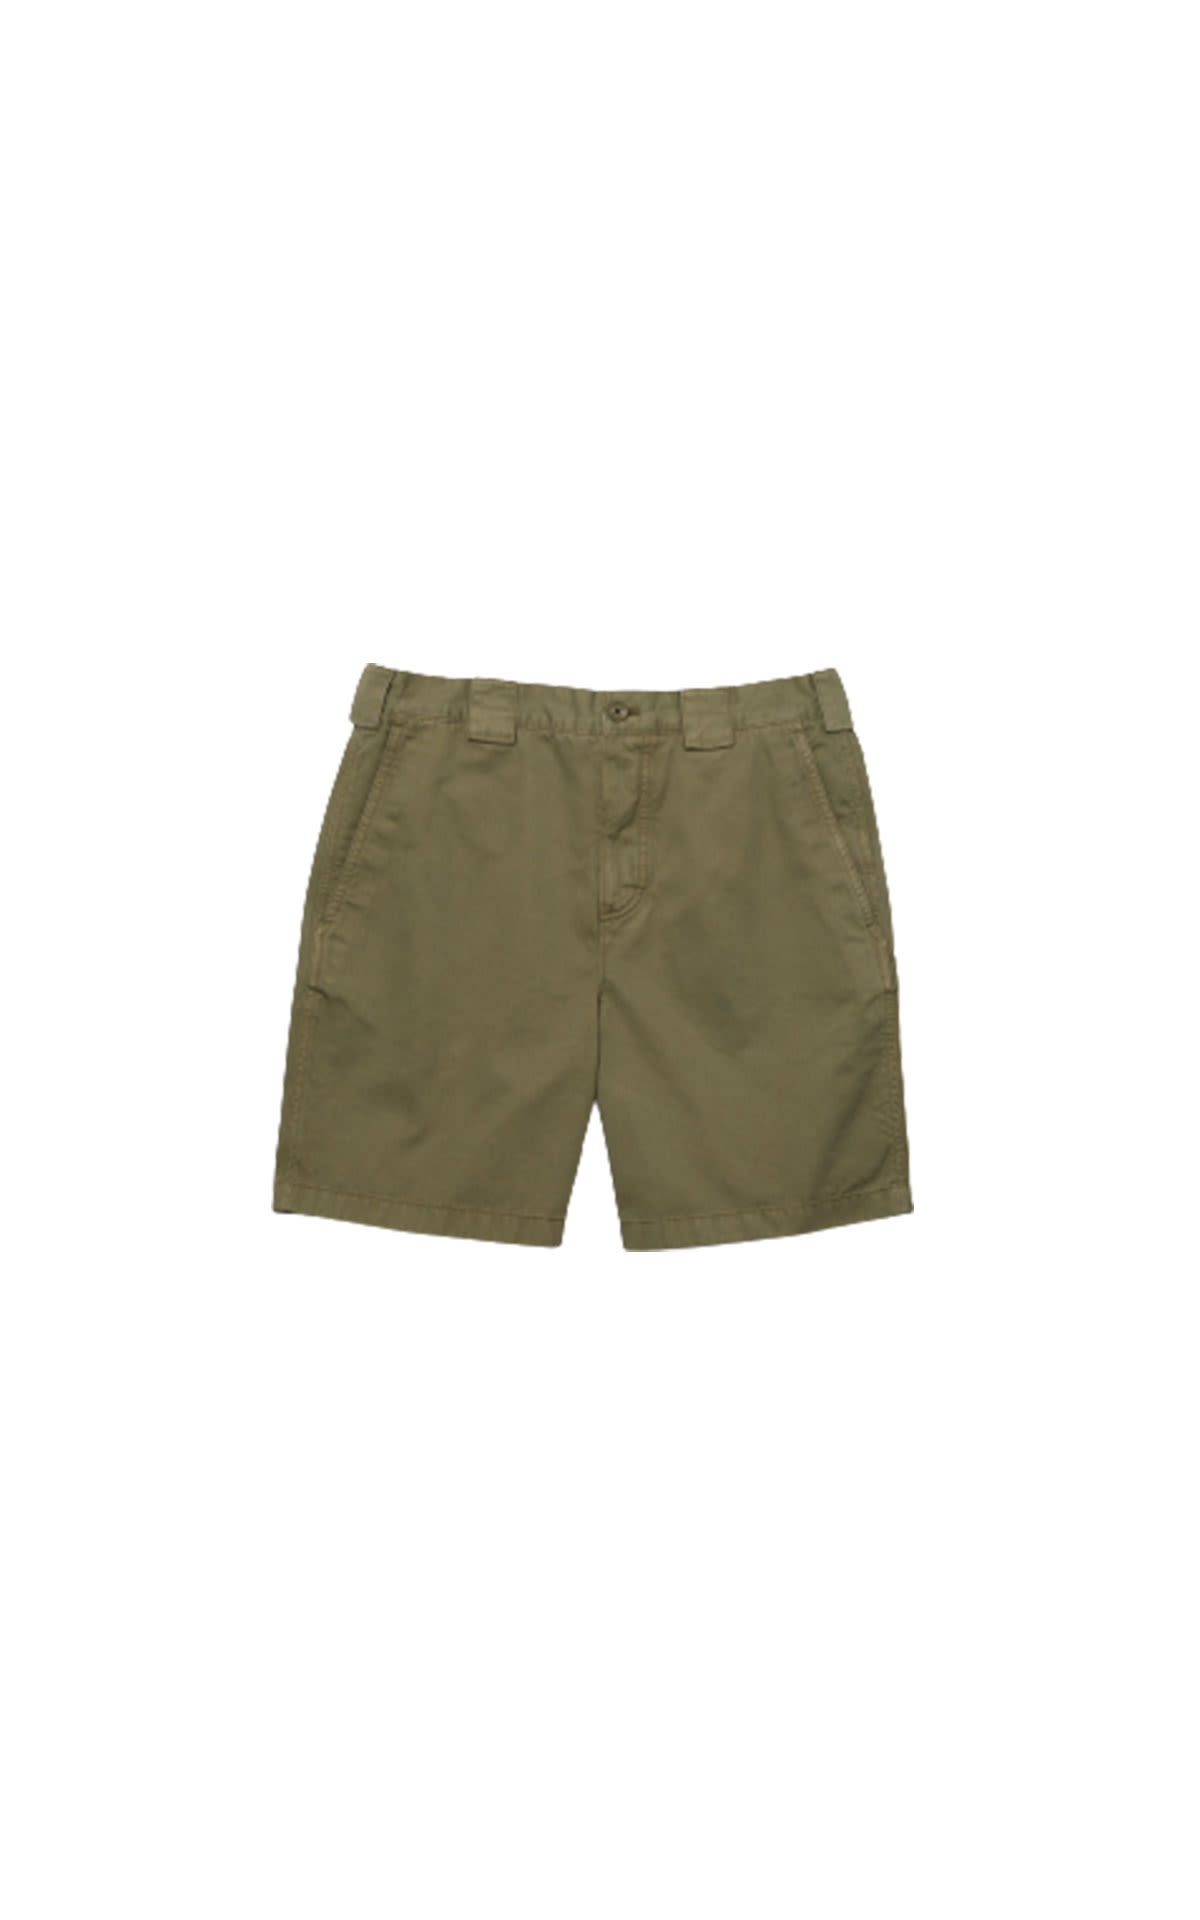 Lacoste Relaxed fit soft cotton cargo bermuda shorts from Bicester Village